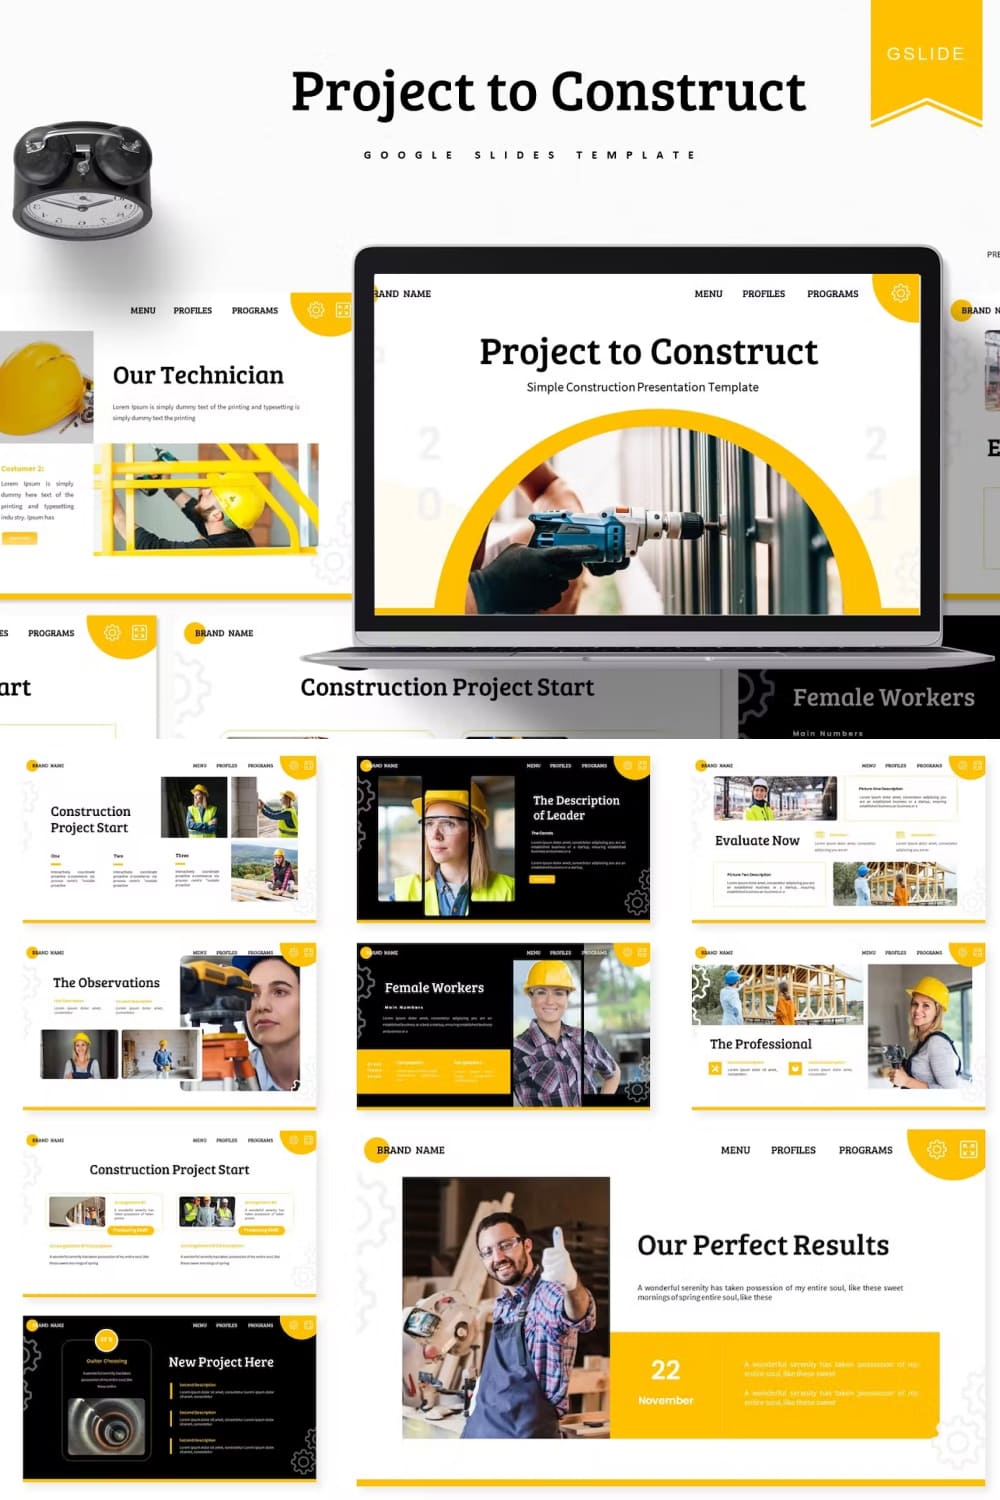 Project To Construct | Google Slides Template - Pinterest.